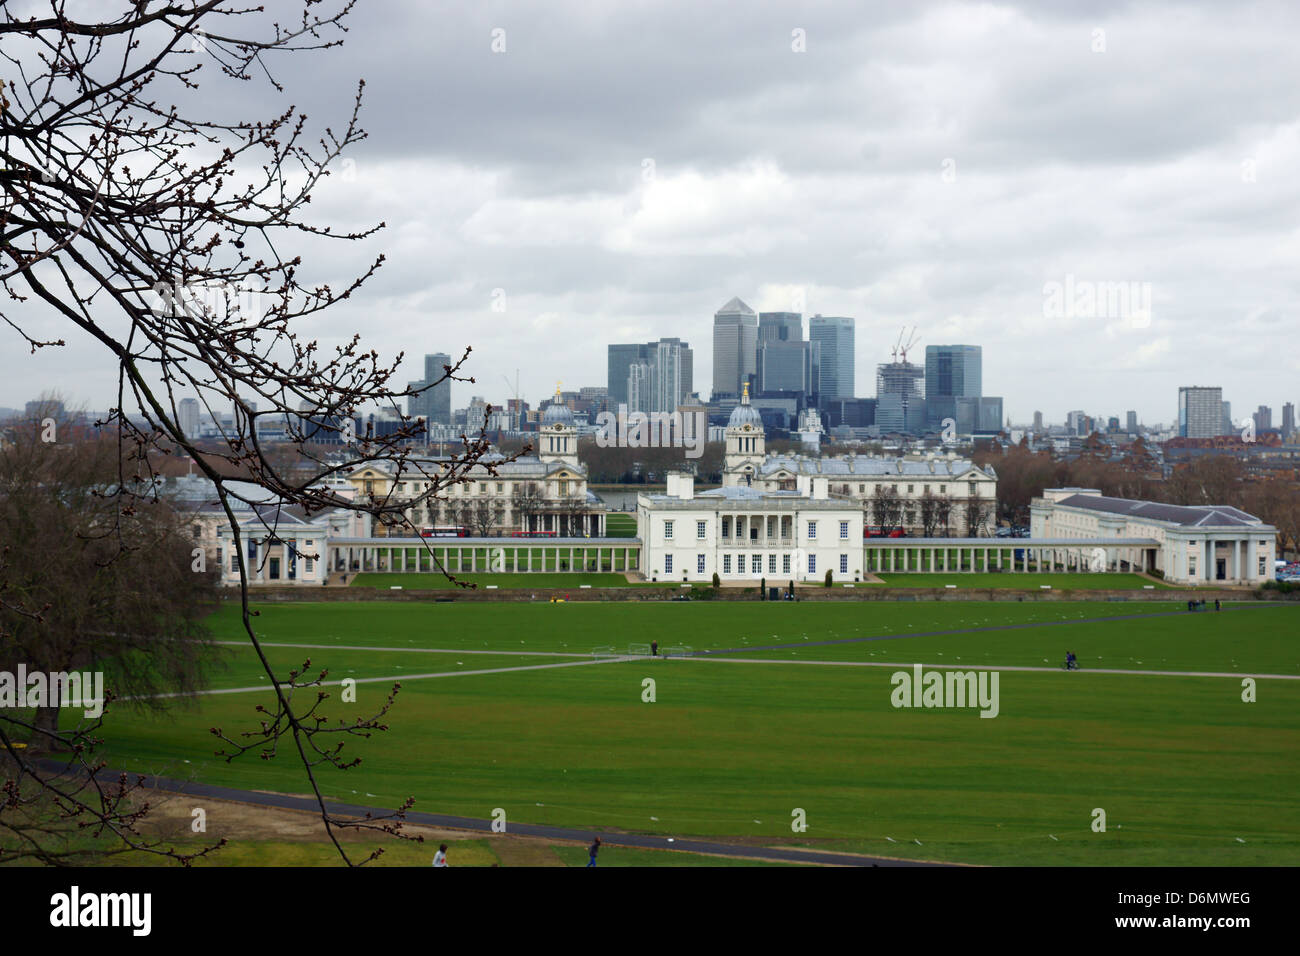 london cityscape city view cloudy day Stock Photo